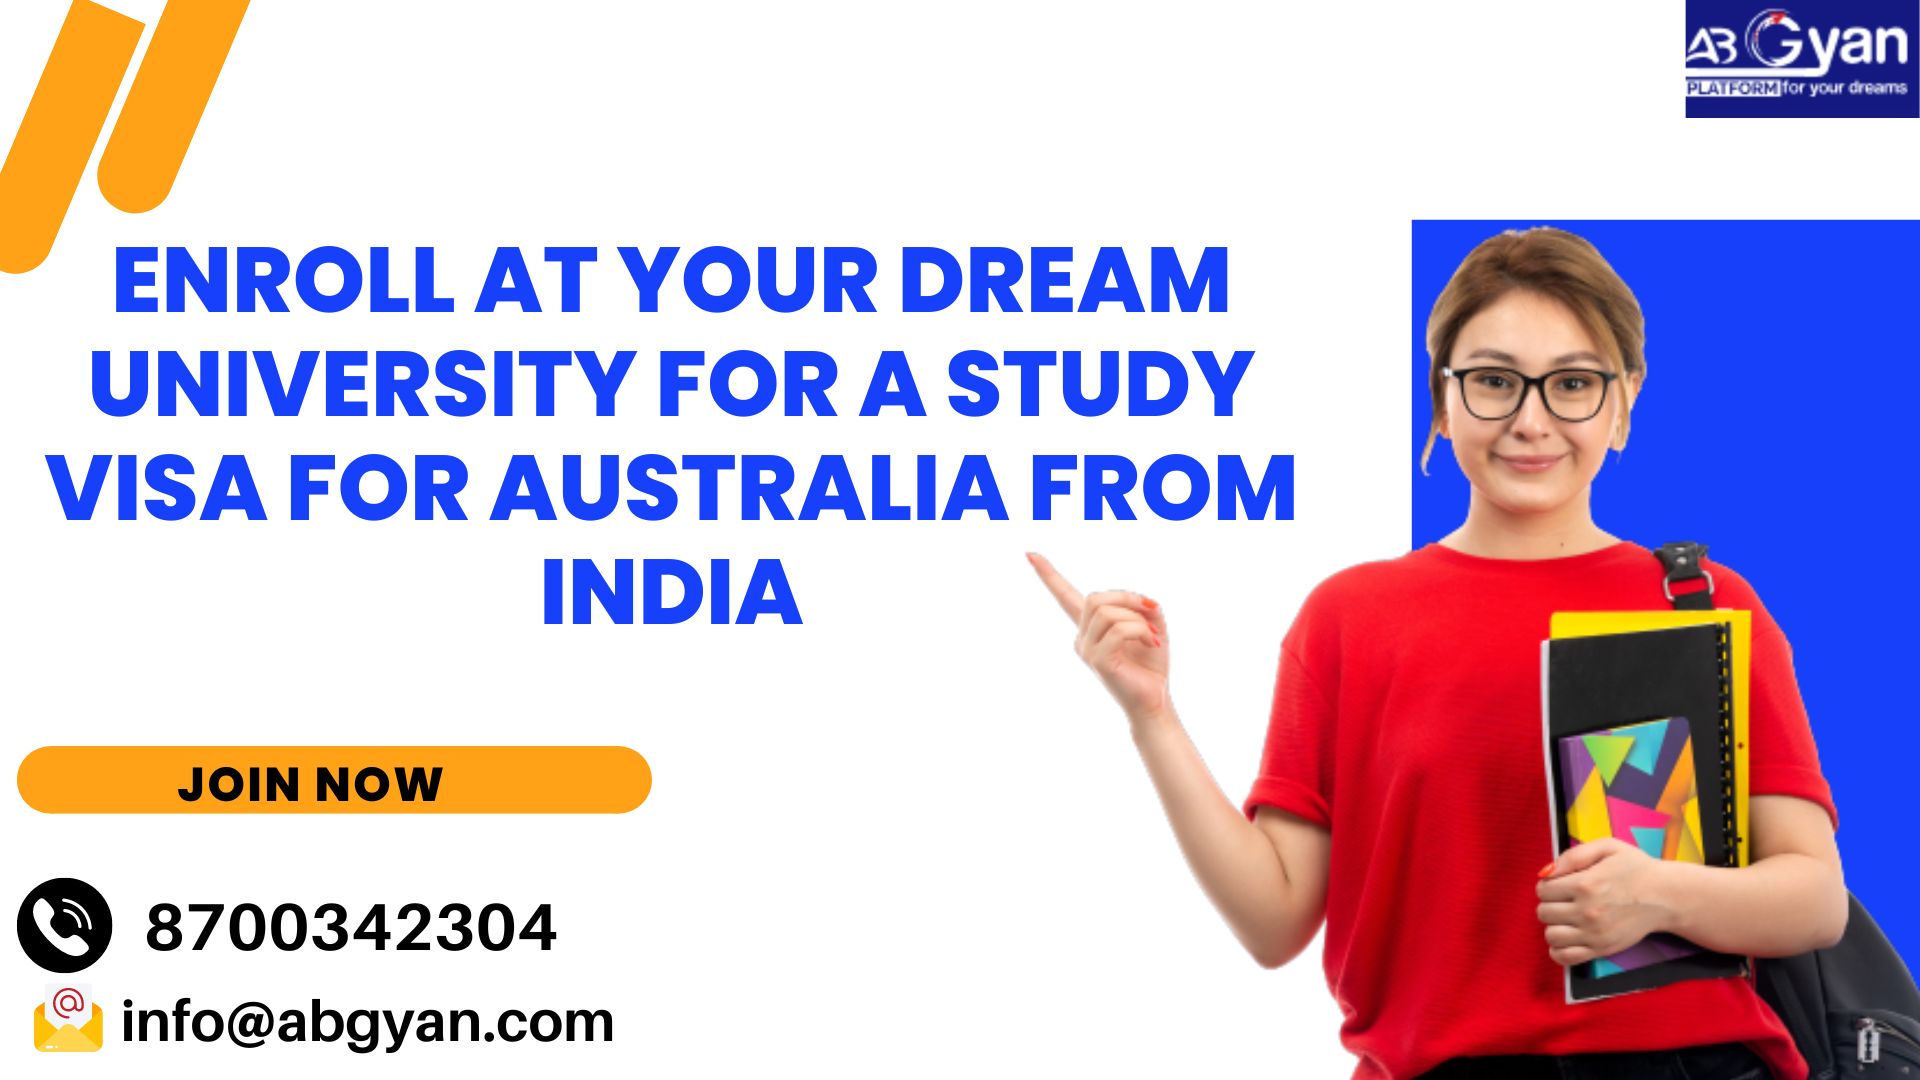 Enroll at Your Dream University for a Study Visa for Australia from India